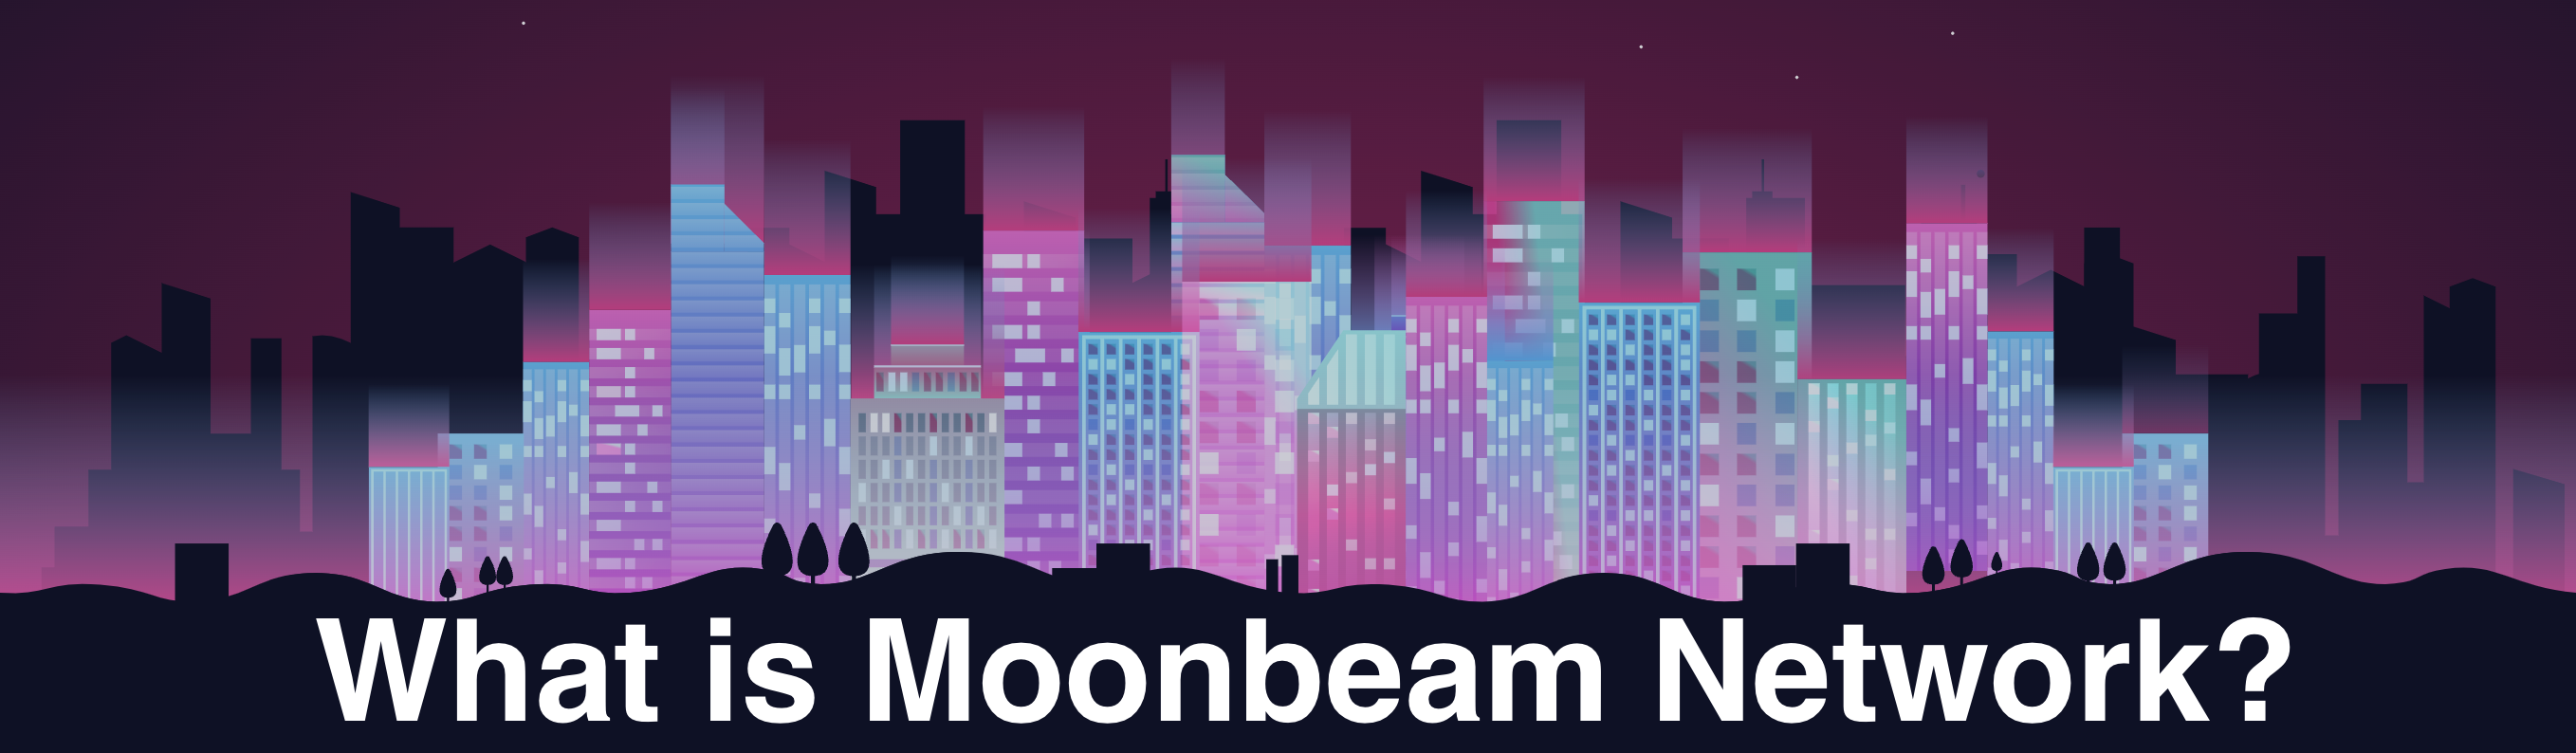 Title stating "What is Moonbeam Network?" in front of a city depicting Moonbeam